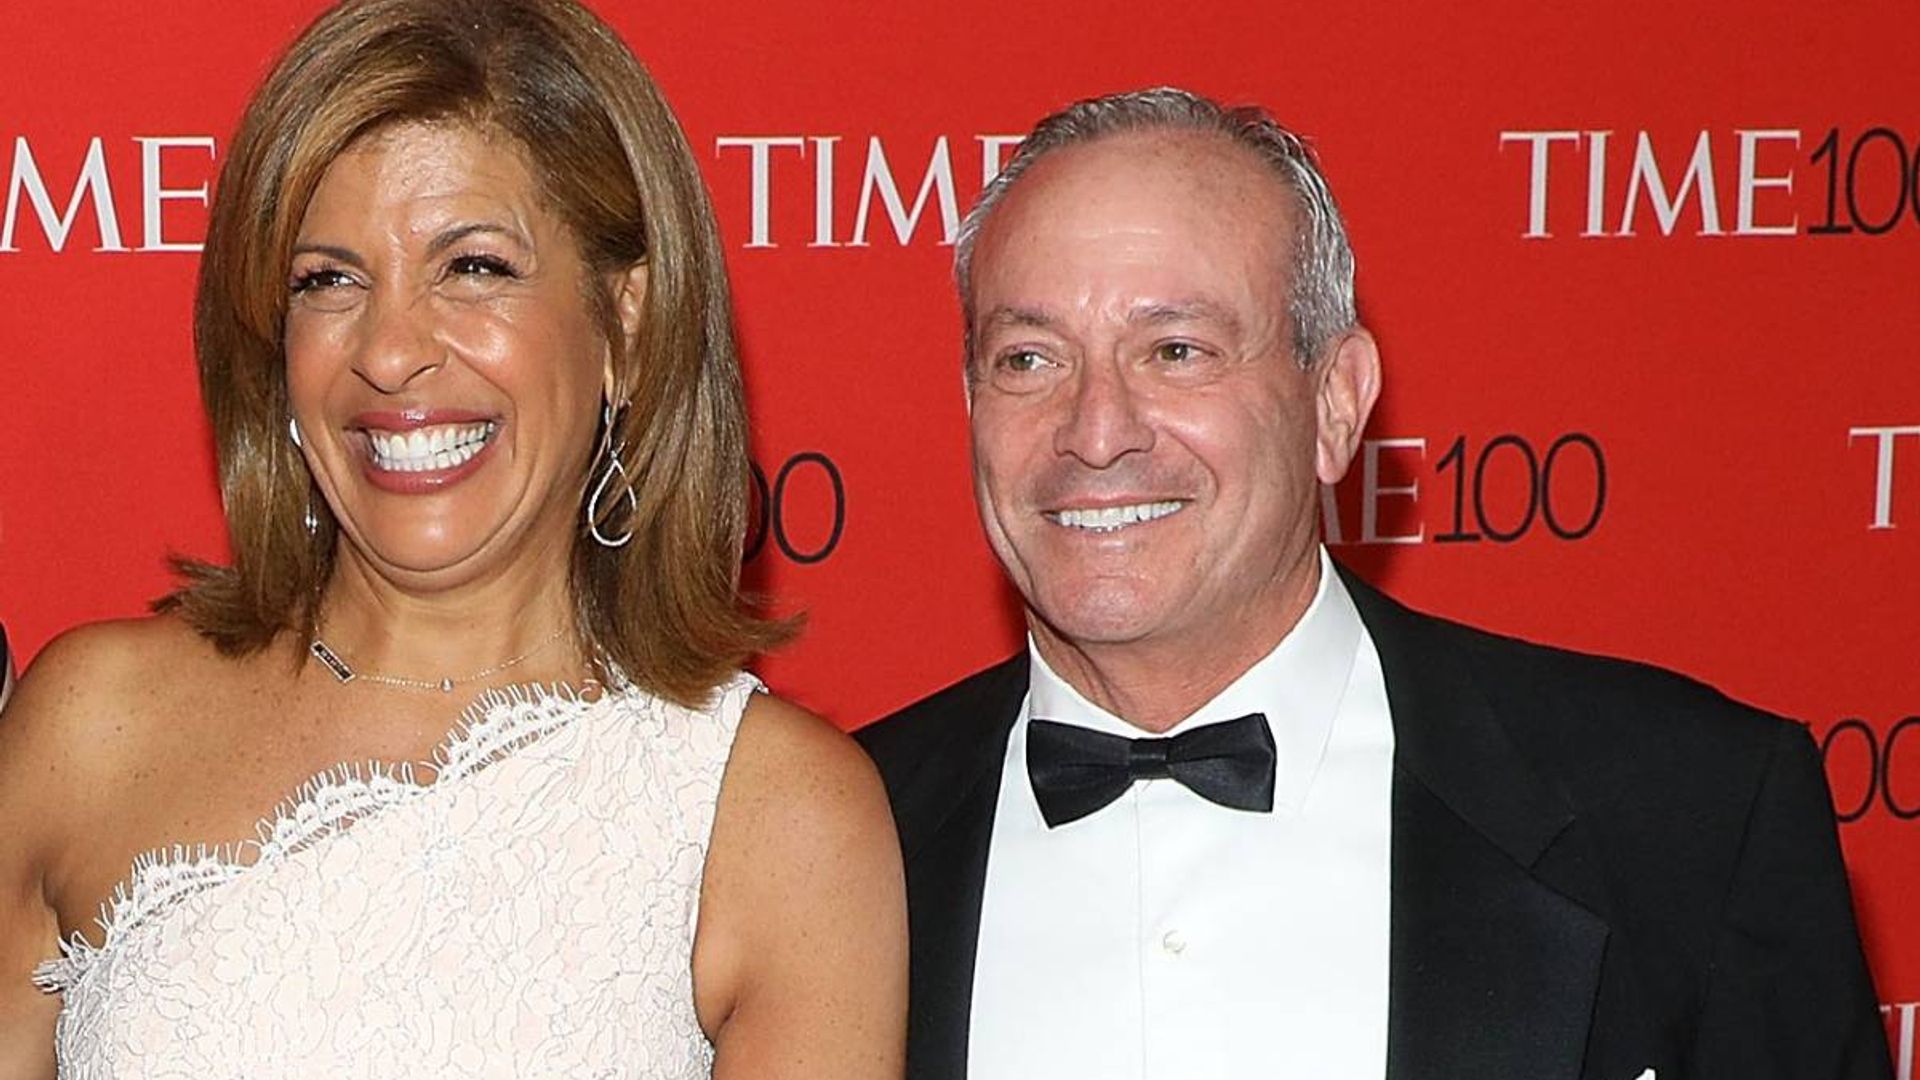 Hoda Kotb surrounded by her family as she marks special celebration after returning home